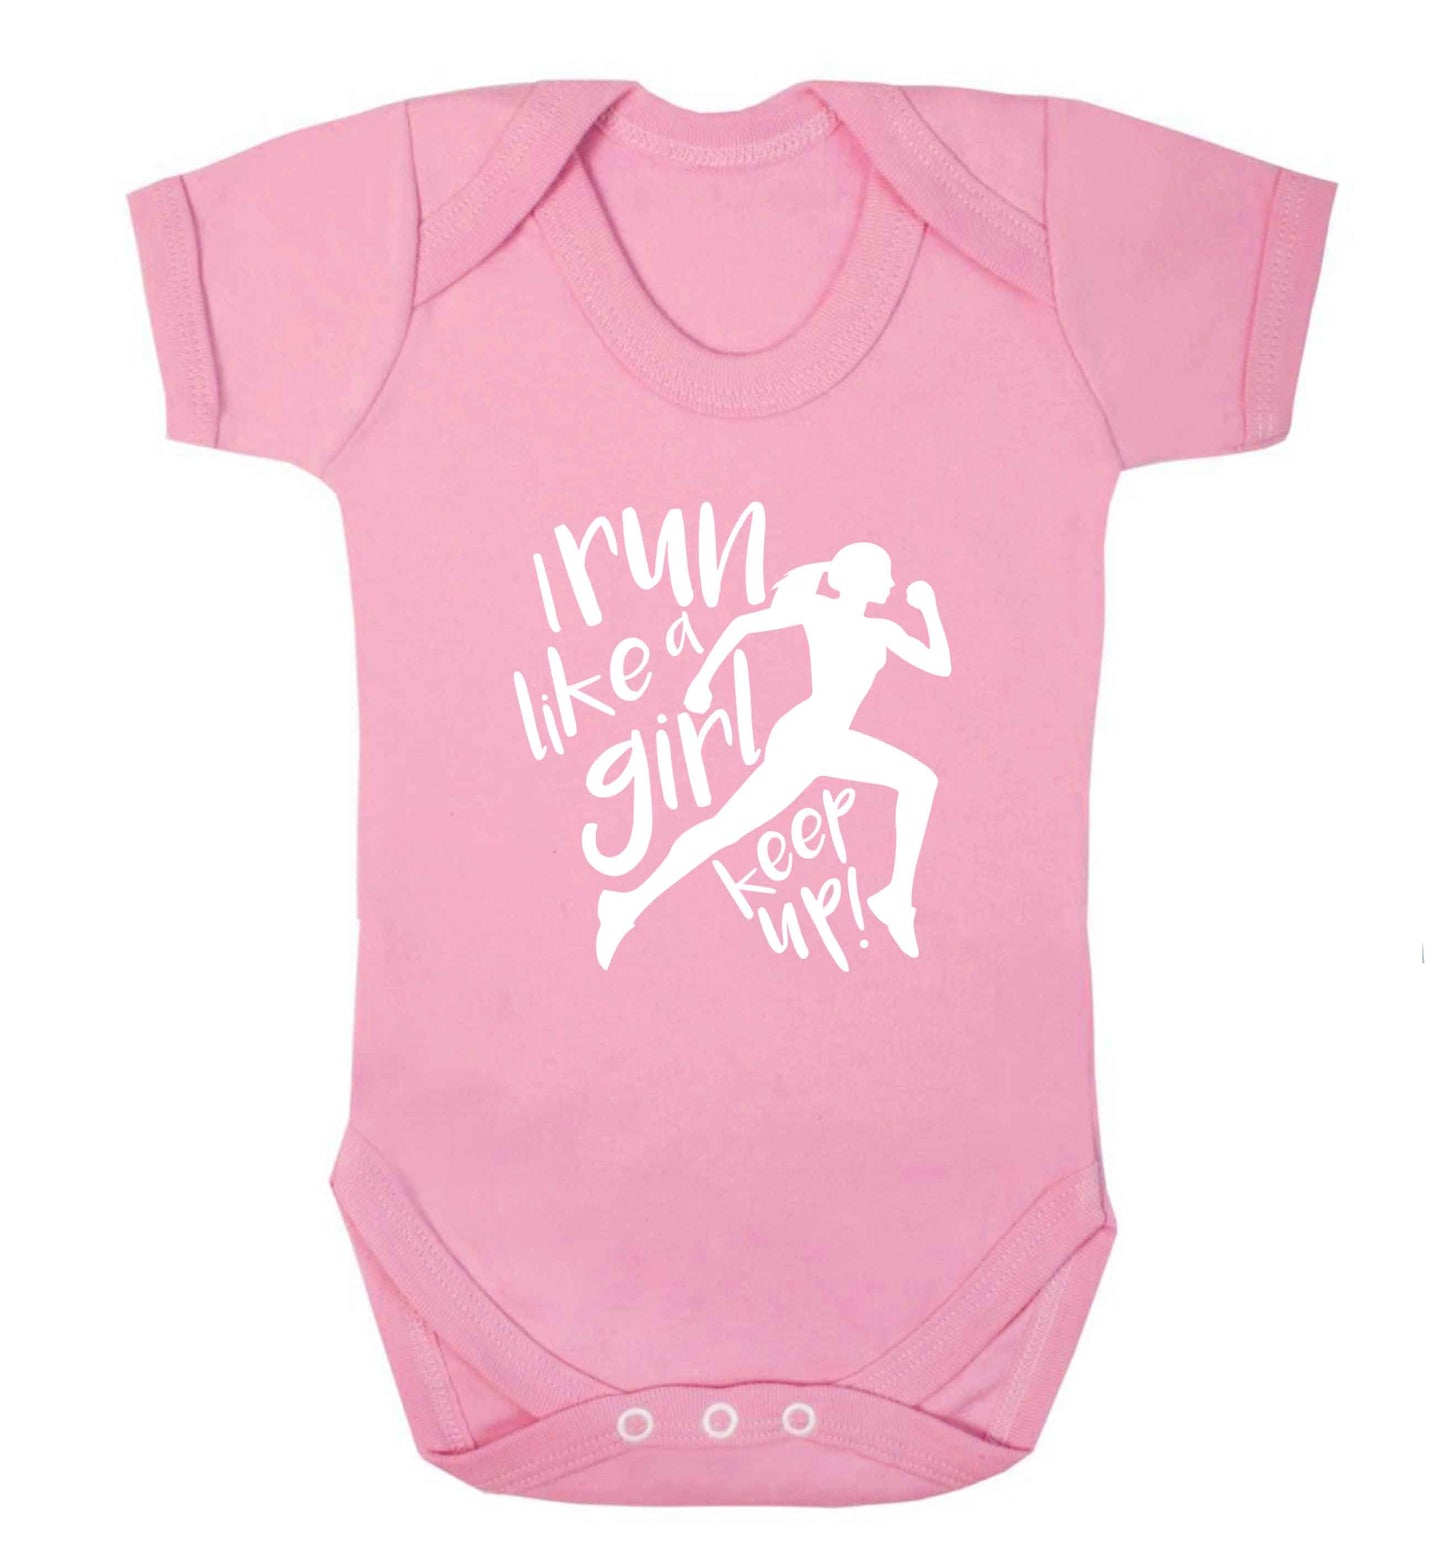 I run like a girl, keep up! baby vest pale pink 18-24 months